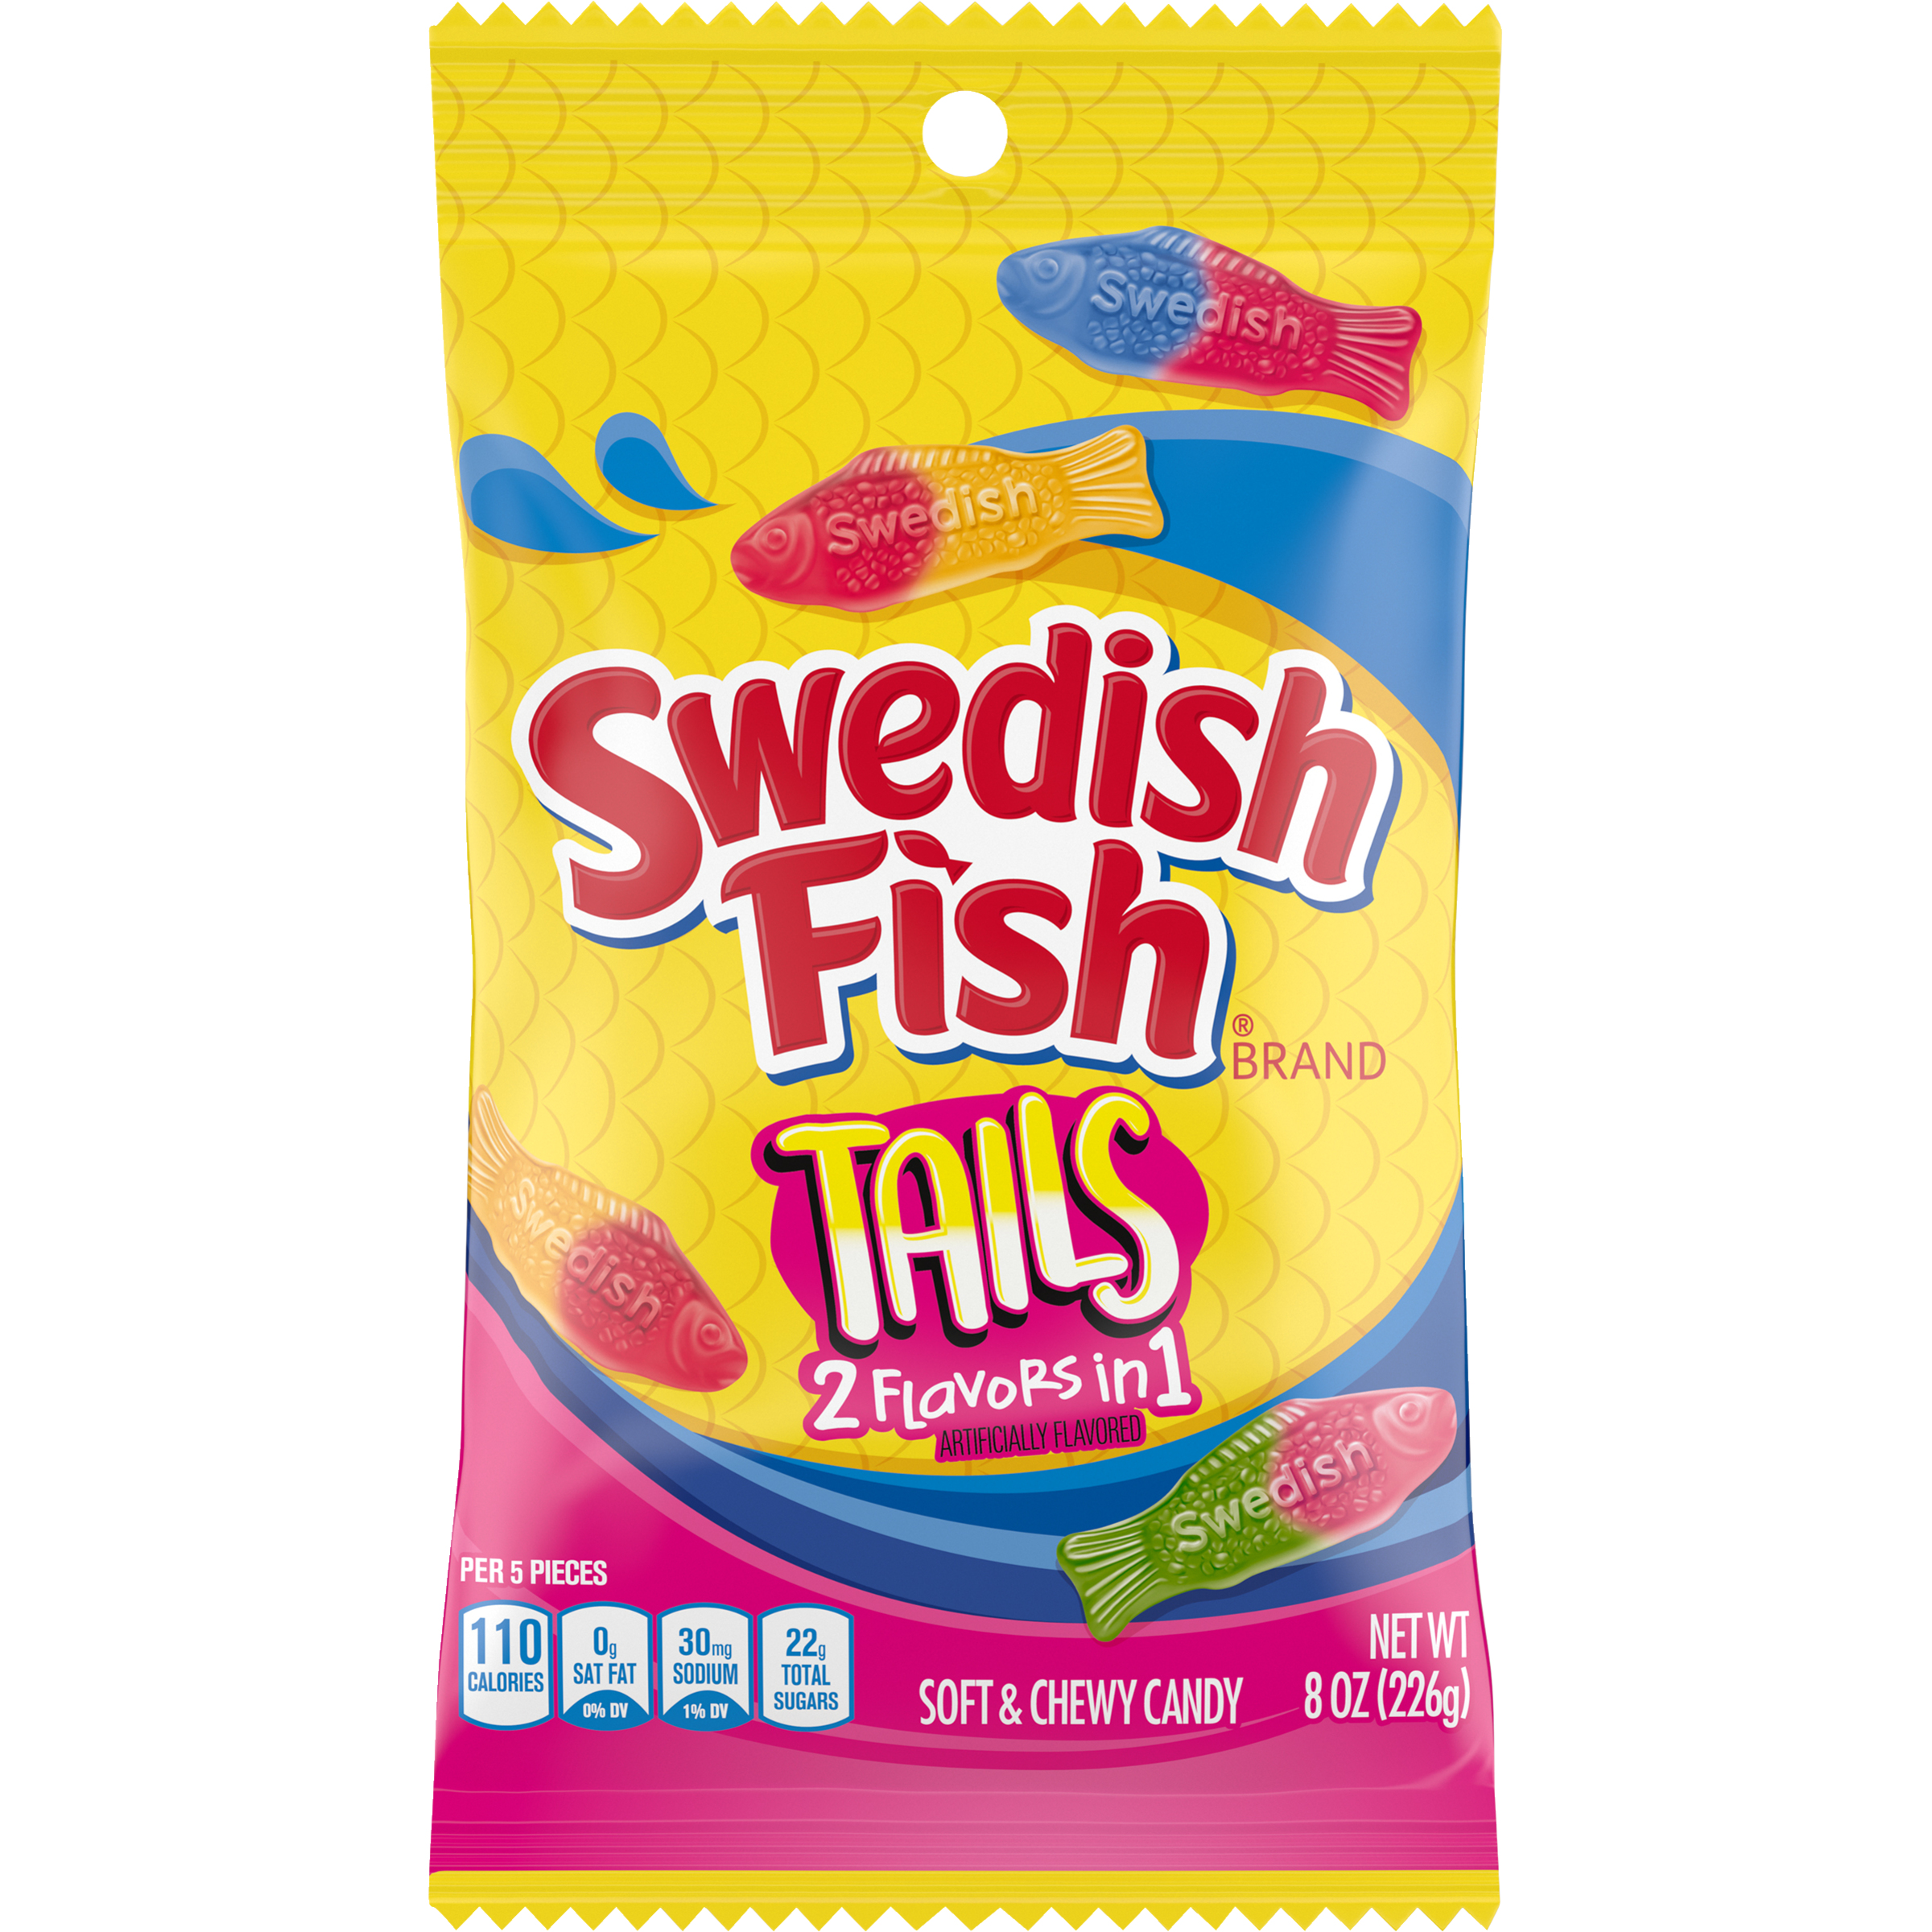 SWEDISH FISH Tails 2 Flavors in 1 Soft & Chewy Candy, 8 oz-2